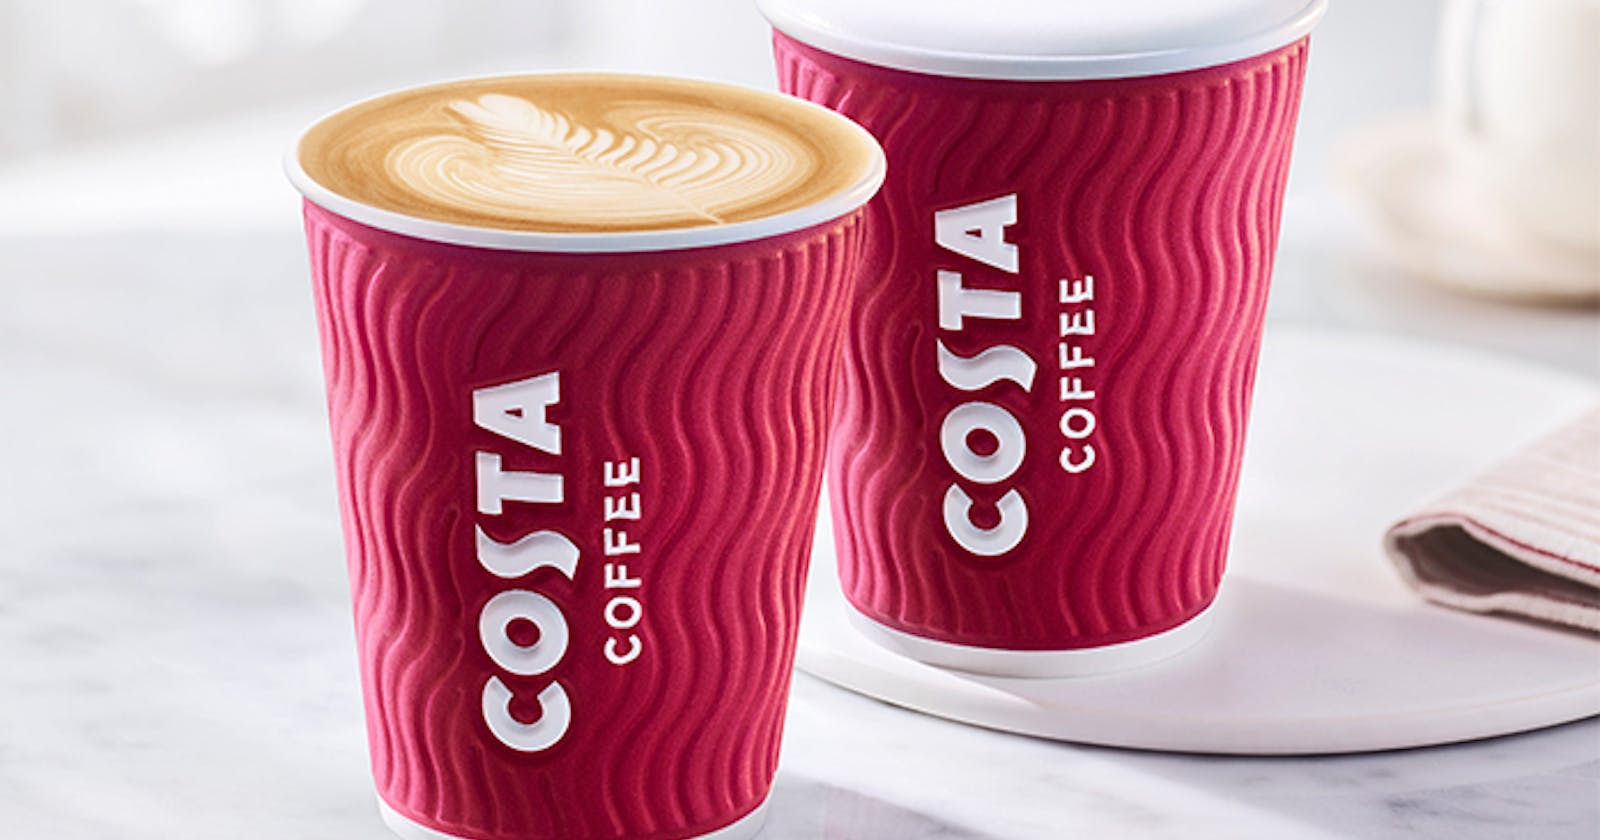 Free Costa Coffee Are You Currently Getting A Great Deal?